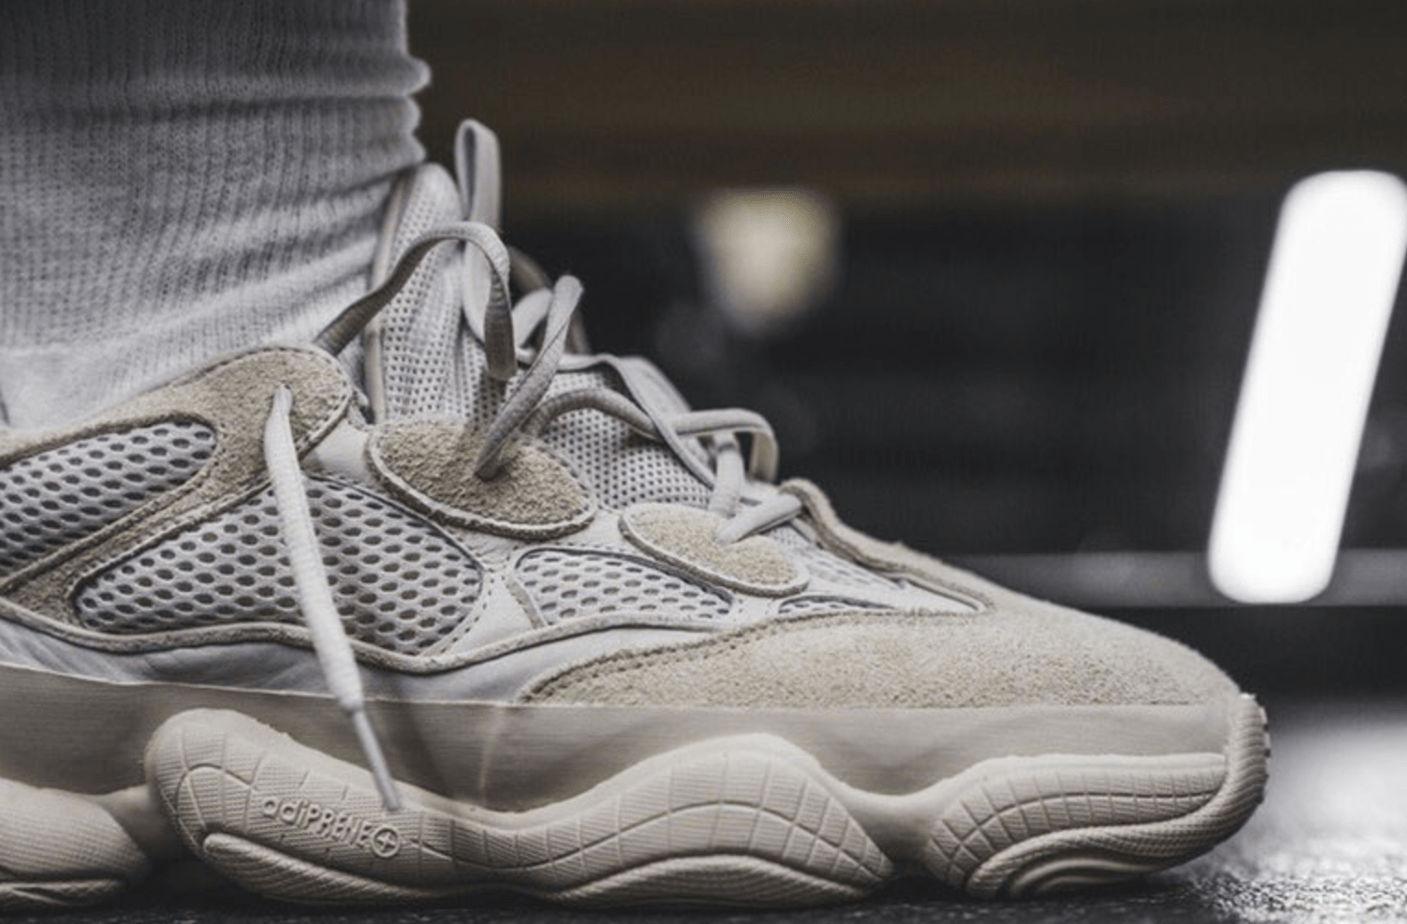 Take a Closer Look at the adidas Yeezy 500 1526 x 1002